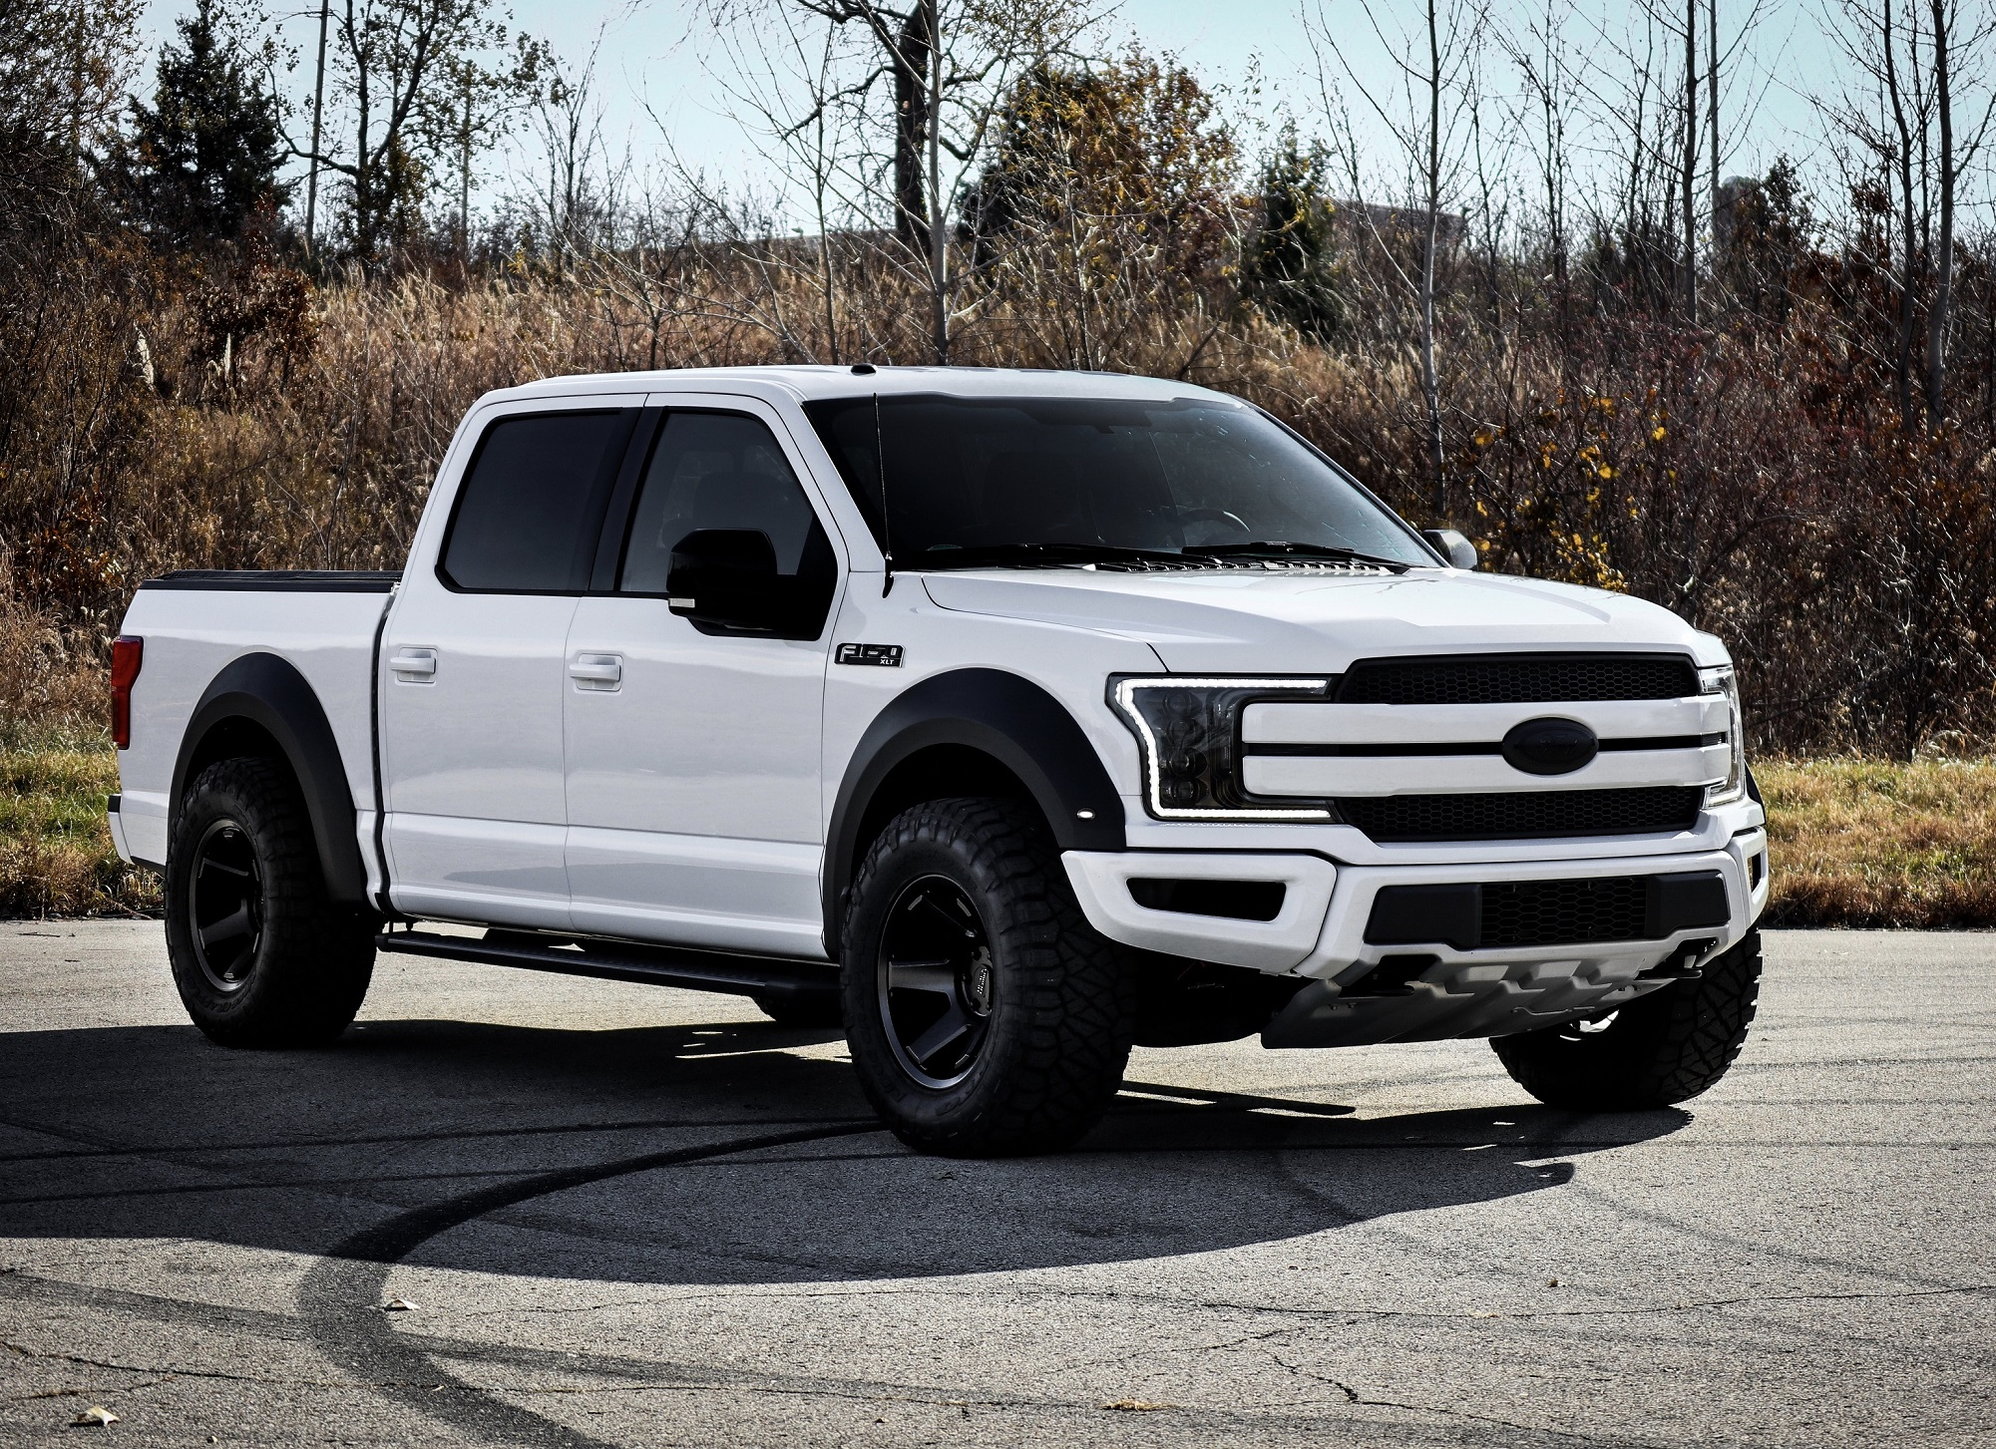 JCROUCH'S Oxford White 2018 XLT - Page 7 - Ford F150 Forum - Community ...